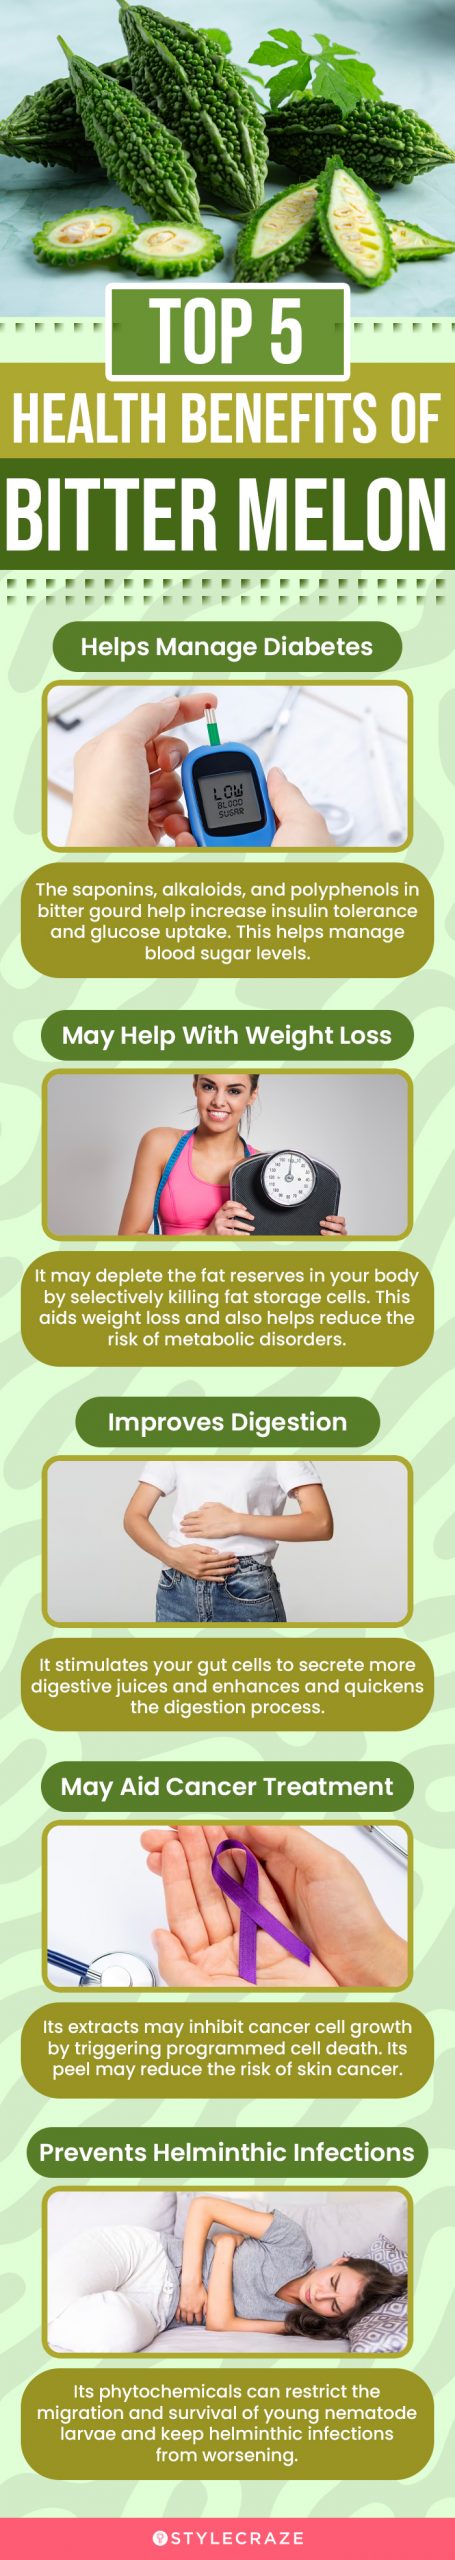 top 5 health benefits of bitter melon (infographic)